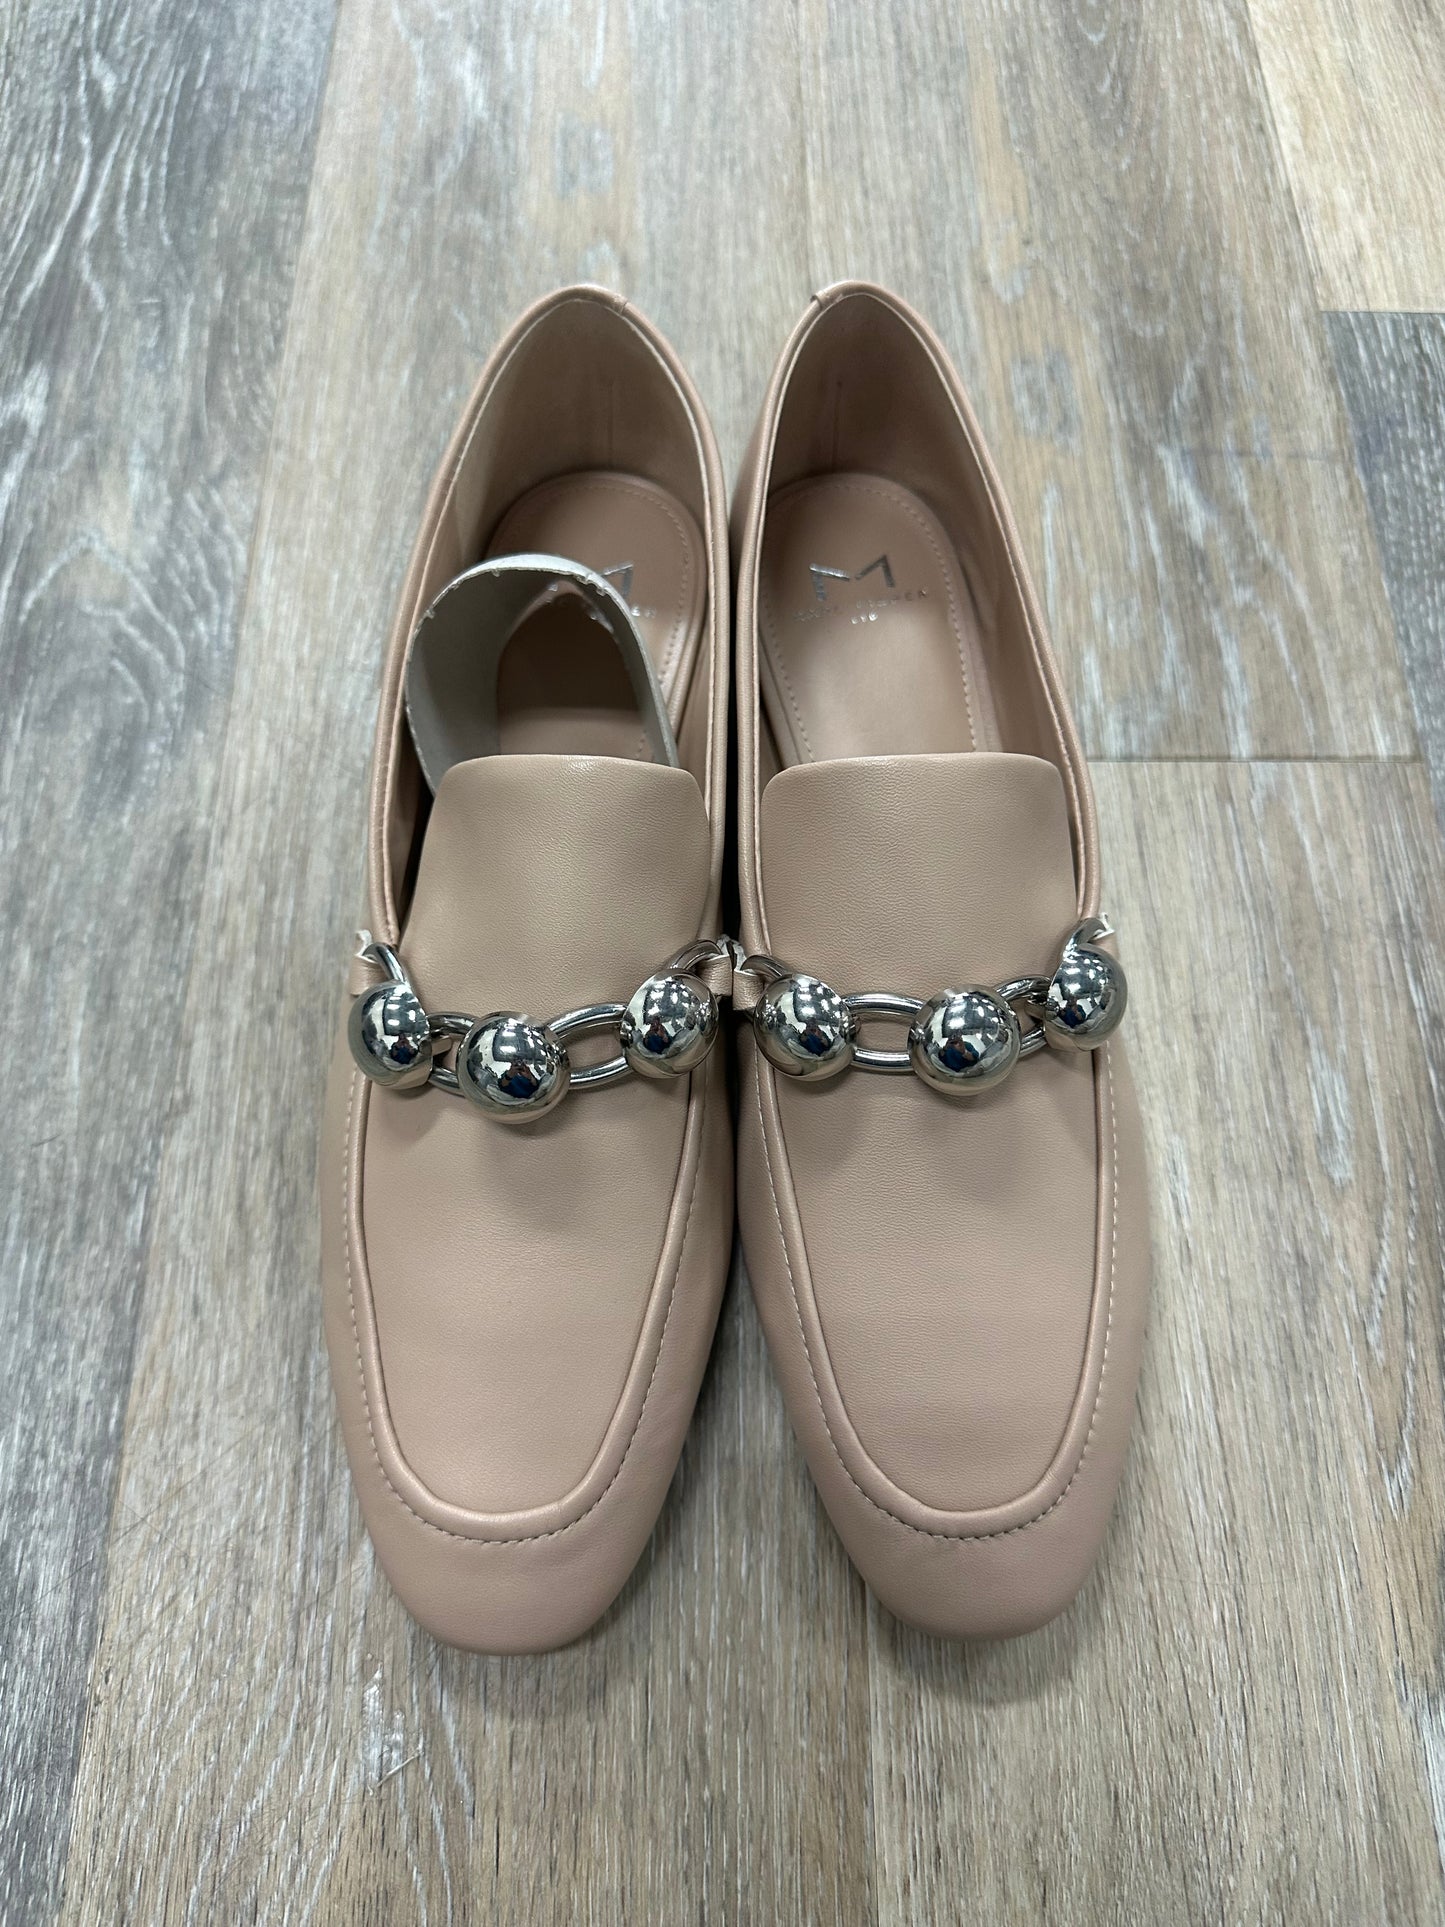 Shoes Flats Loafer Oxford By Marc Fisher  Size: 9